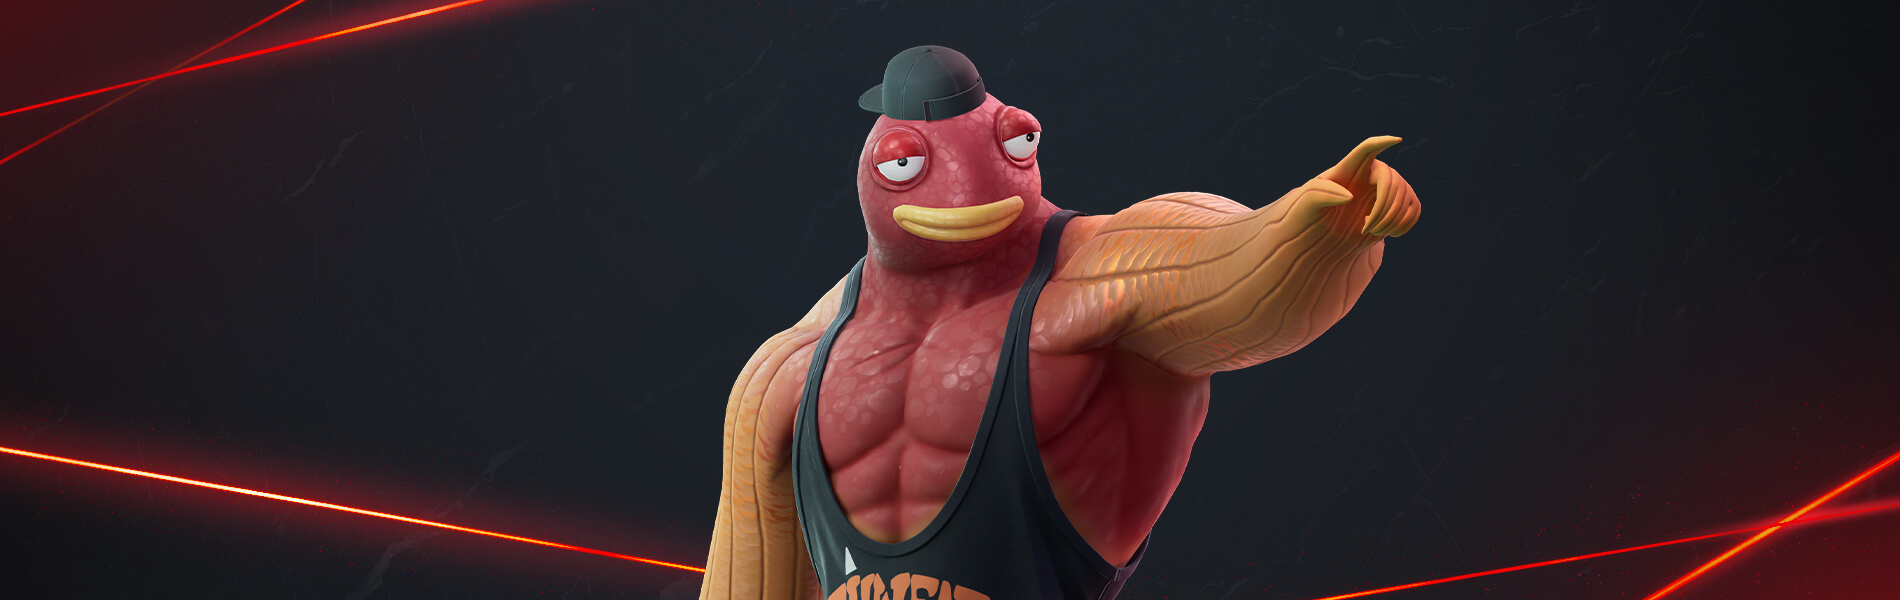 fortnite-fish-thicc-outfit-1900x600-2e6f28286743